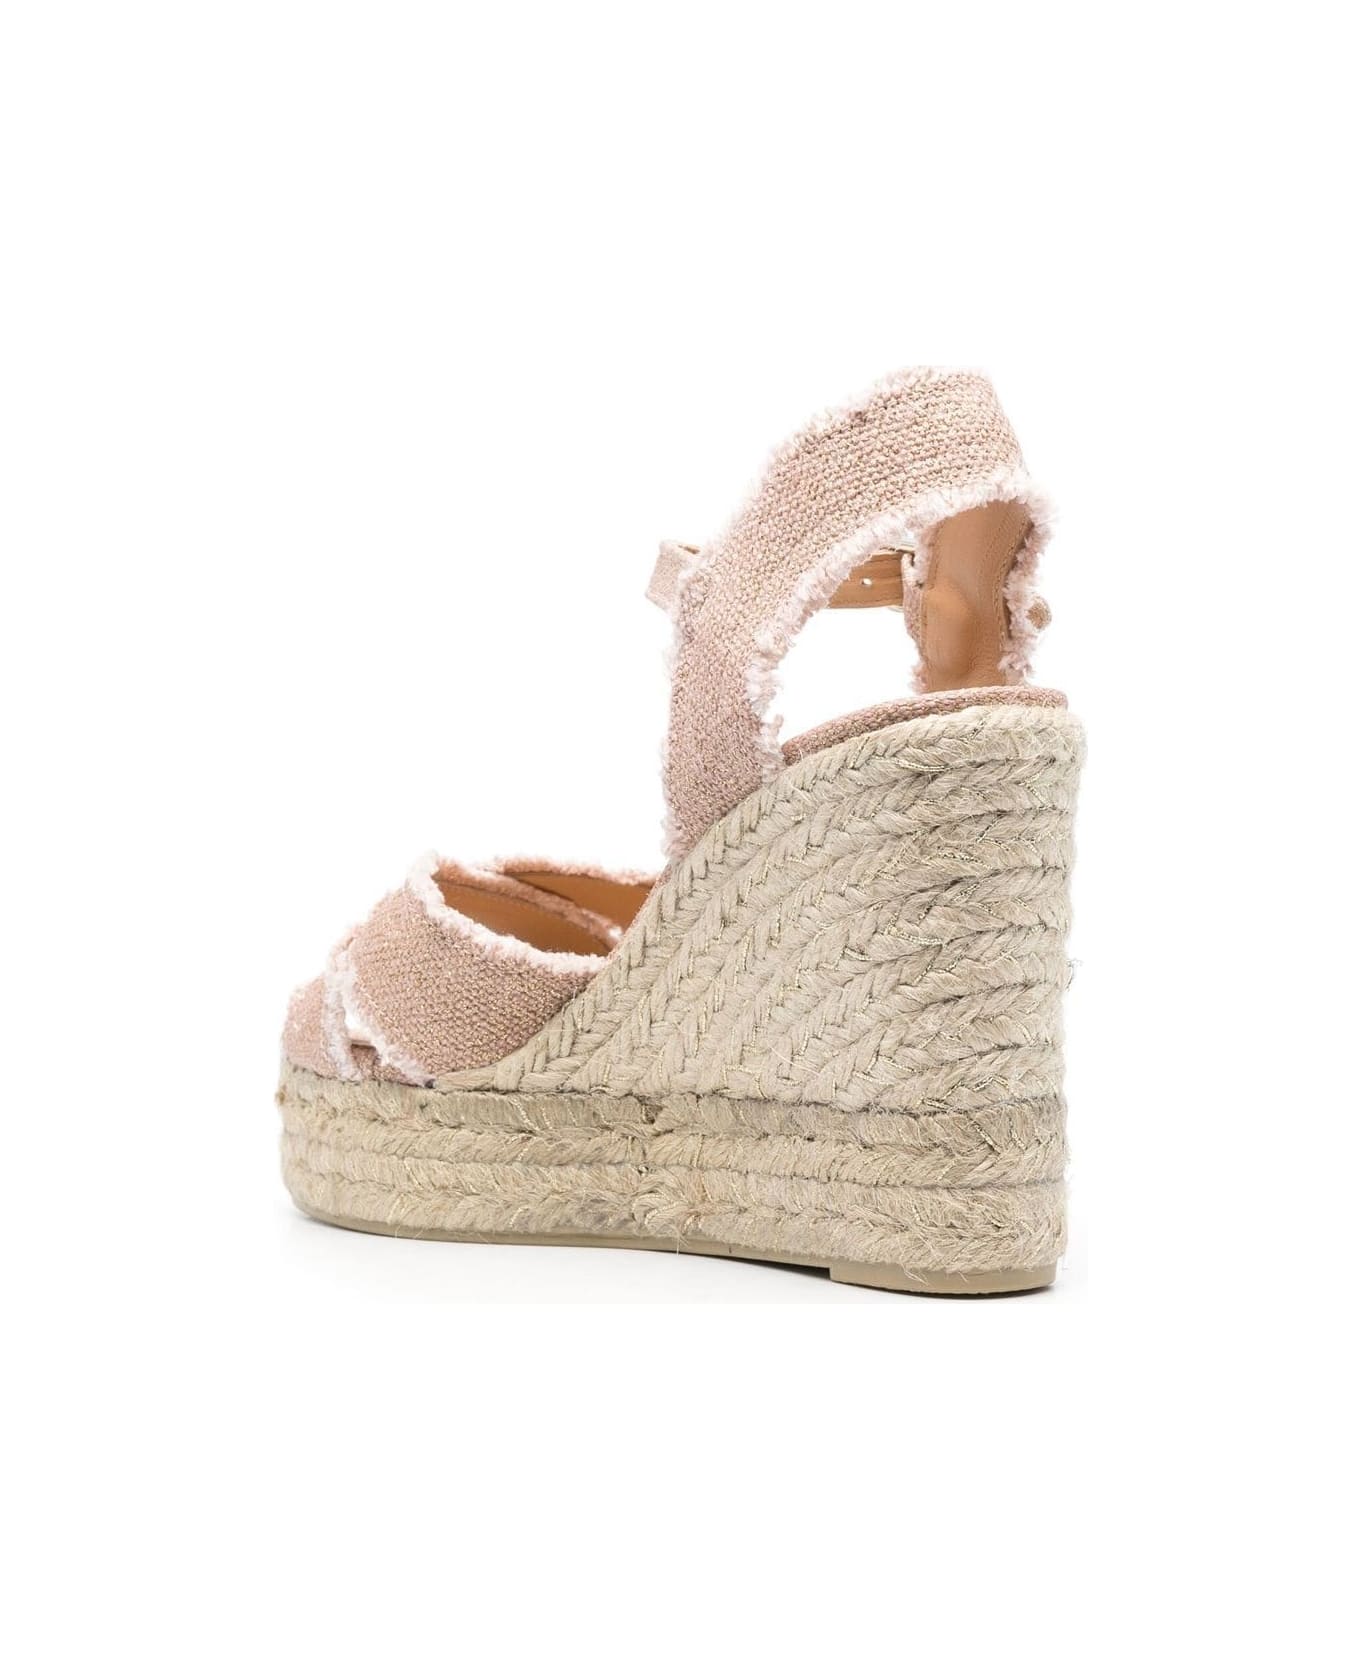 Castañer Bromelia Wedge Espadrille In Pink Linen With Gold Glitter - Rosa